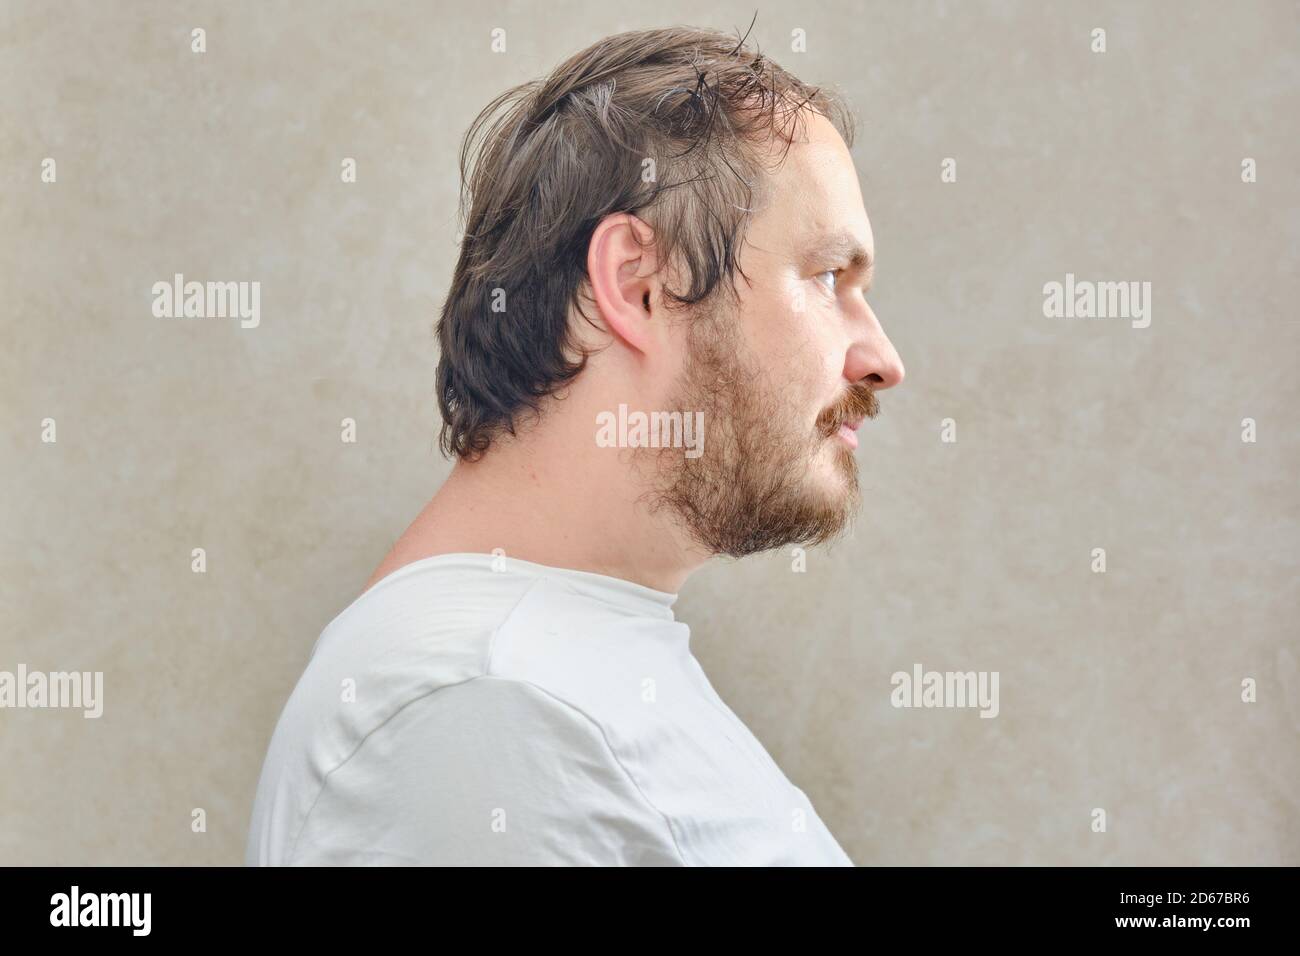 Portrait of a bearded man with a beard in a white t-shirt, close-up. Face of a man with a beard 35-40 years old on a beige background Stock Photo